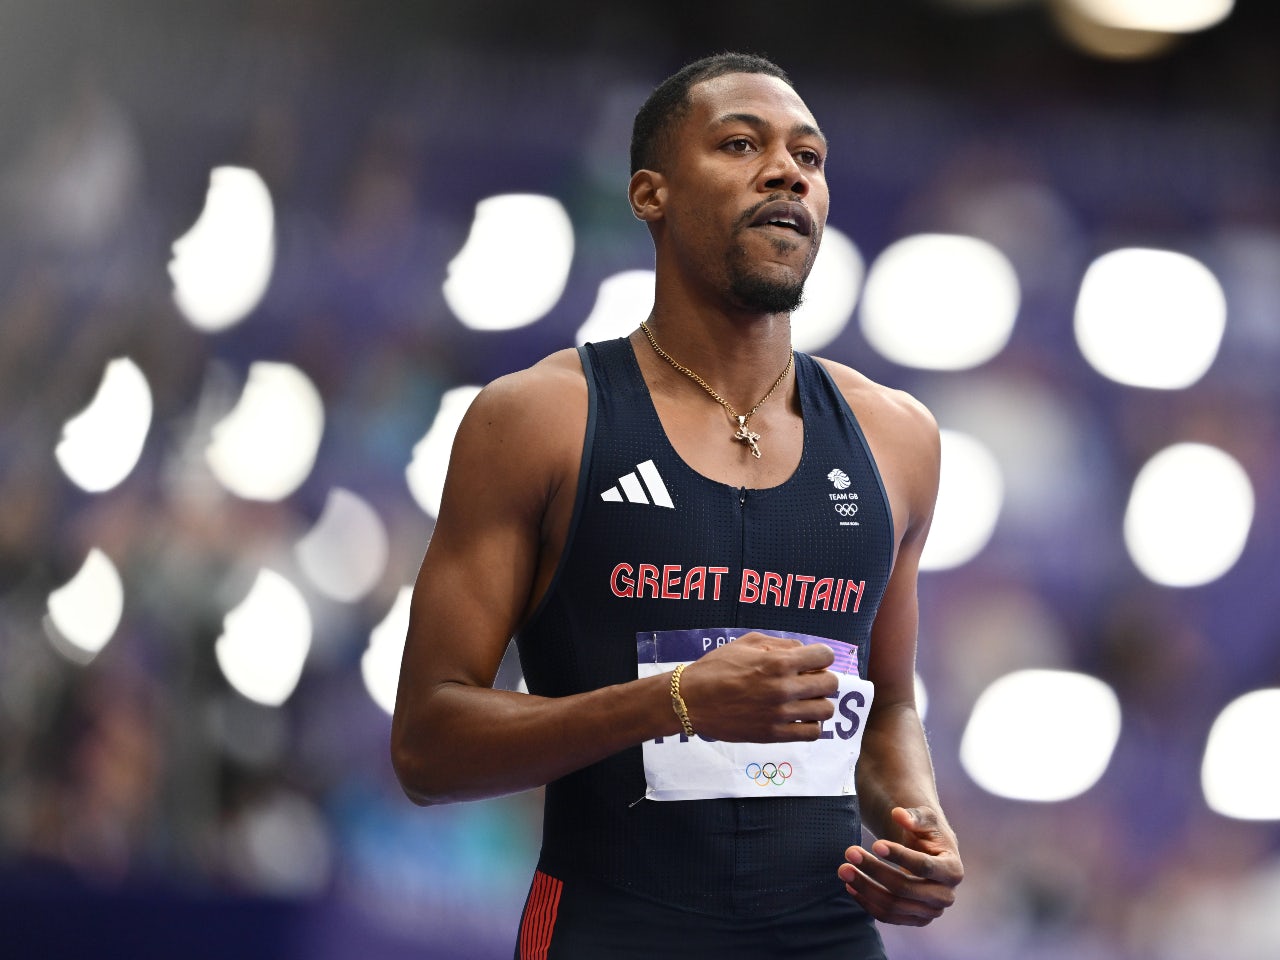 Great Britain's Zharnel Hughes pulls out of Olympics 200m with hamstring injury